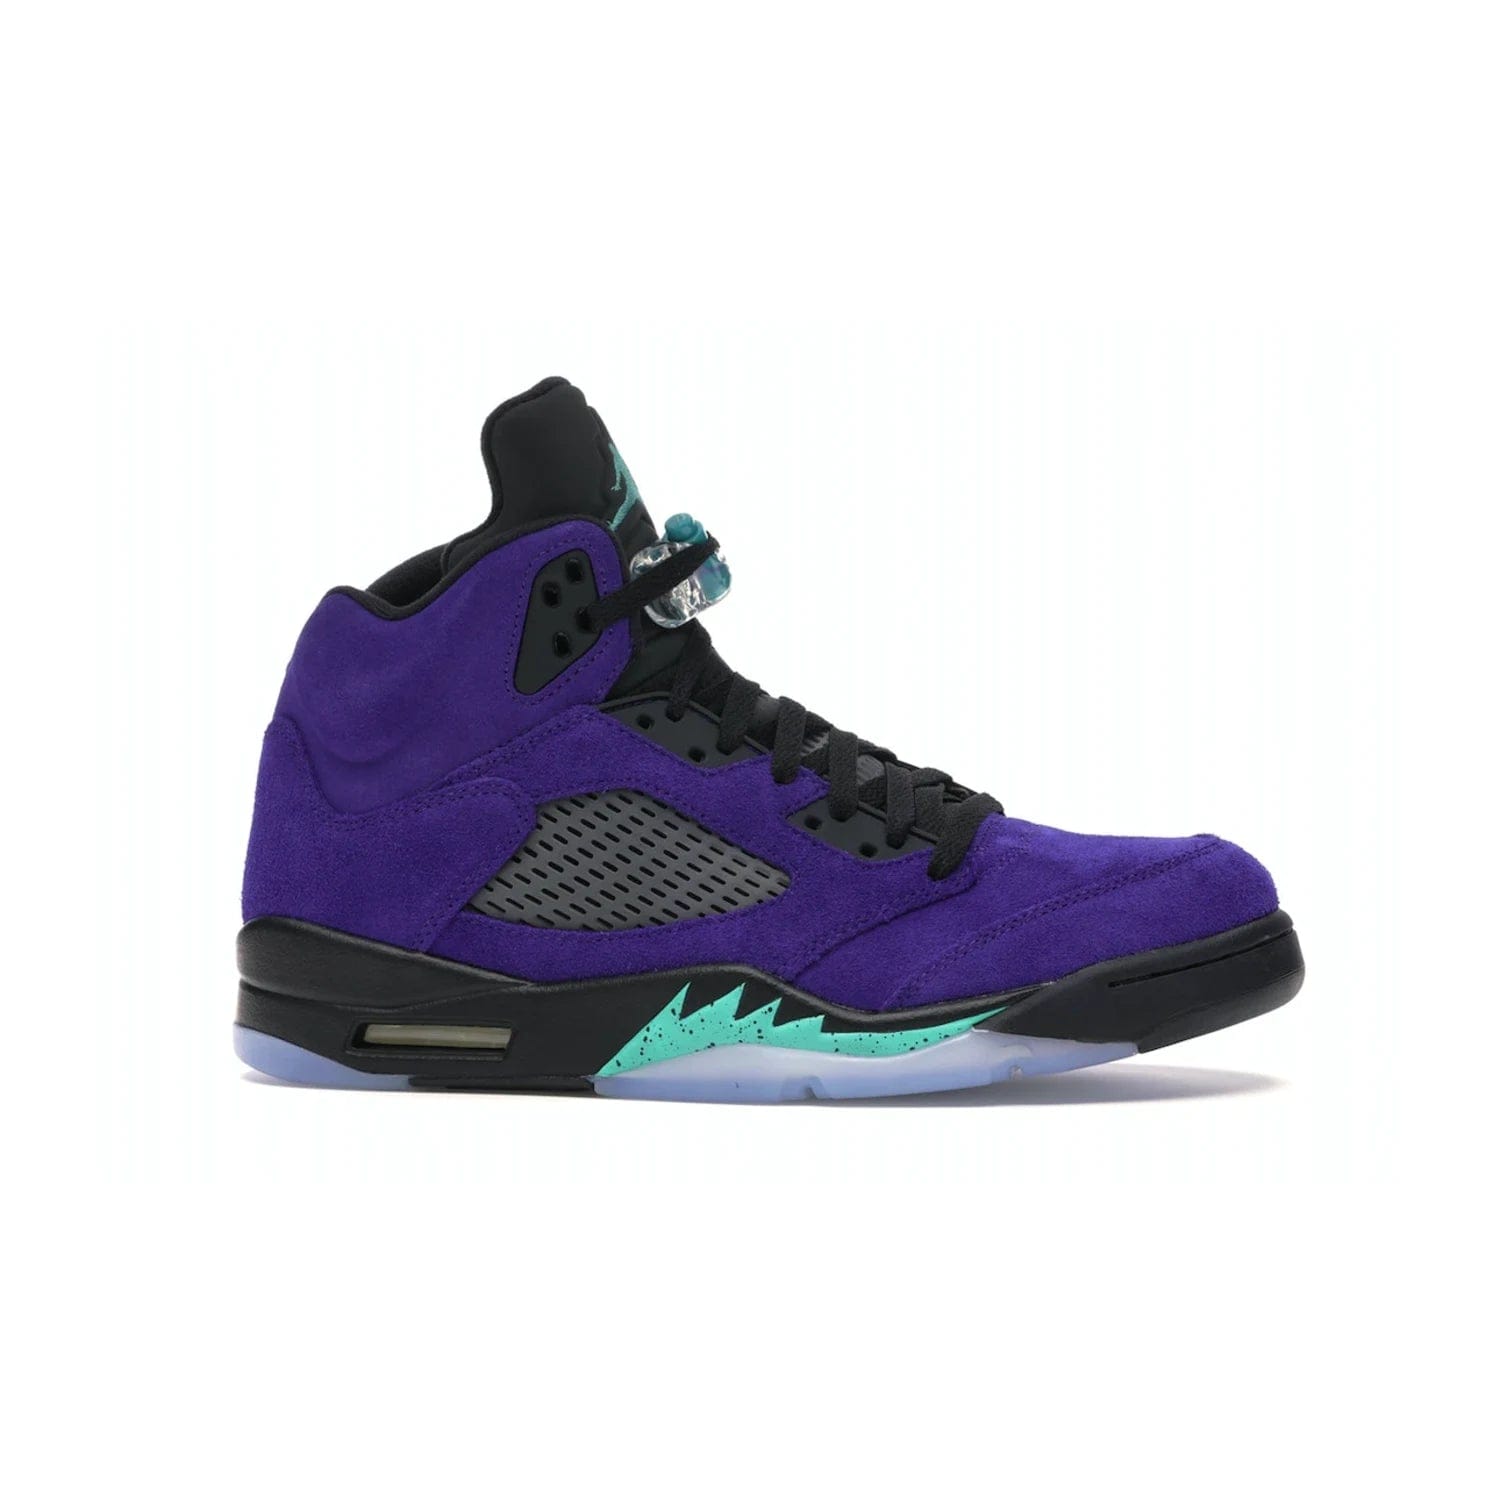 Jordan 5 Retro Alternate Grape - Image 2 - Only at www.BallersClubKickz.com - Bring the classic Jordan 5 Retro Alternate Grape to your sneaker collection! Featuring a purple suede upper, charcoal underlays, green detailing, and an icy and green outsole. Releasing for the first time since 1990, don't miss this chance to add a piece of sneaker history to your collection.